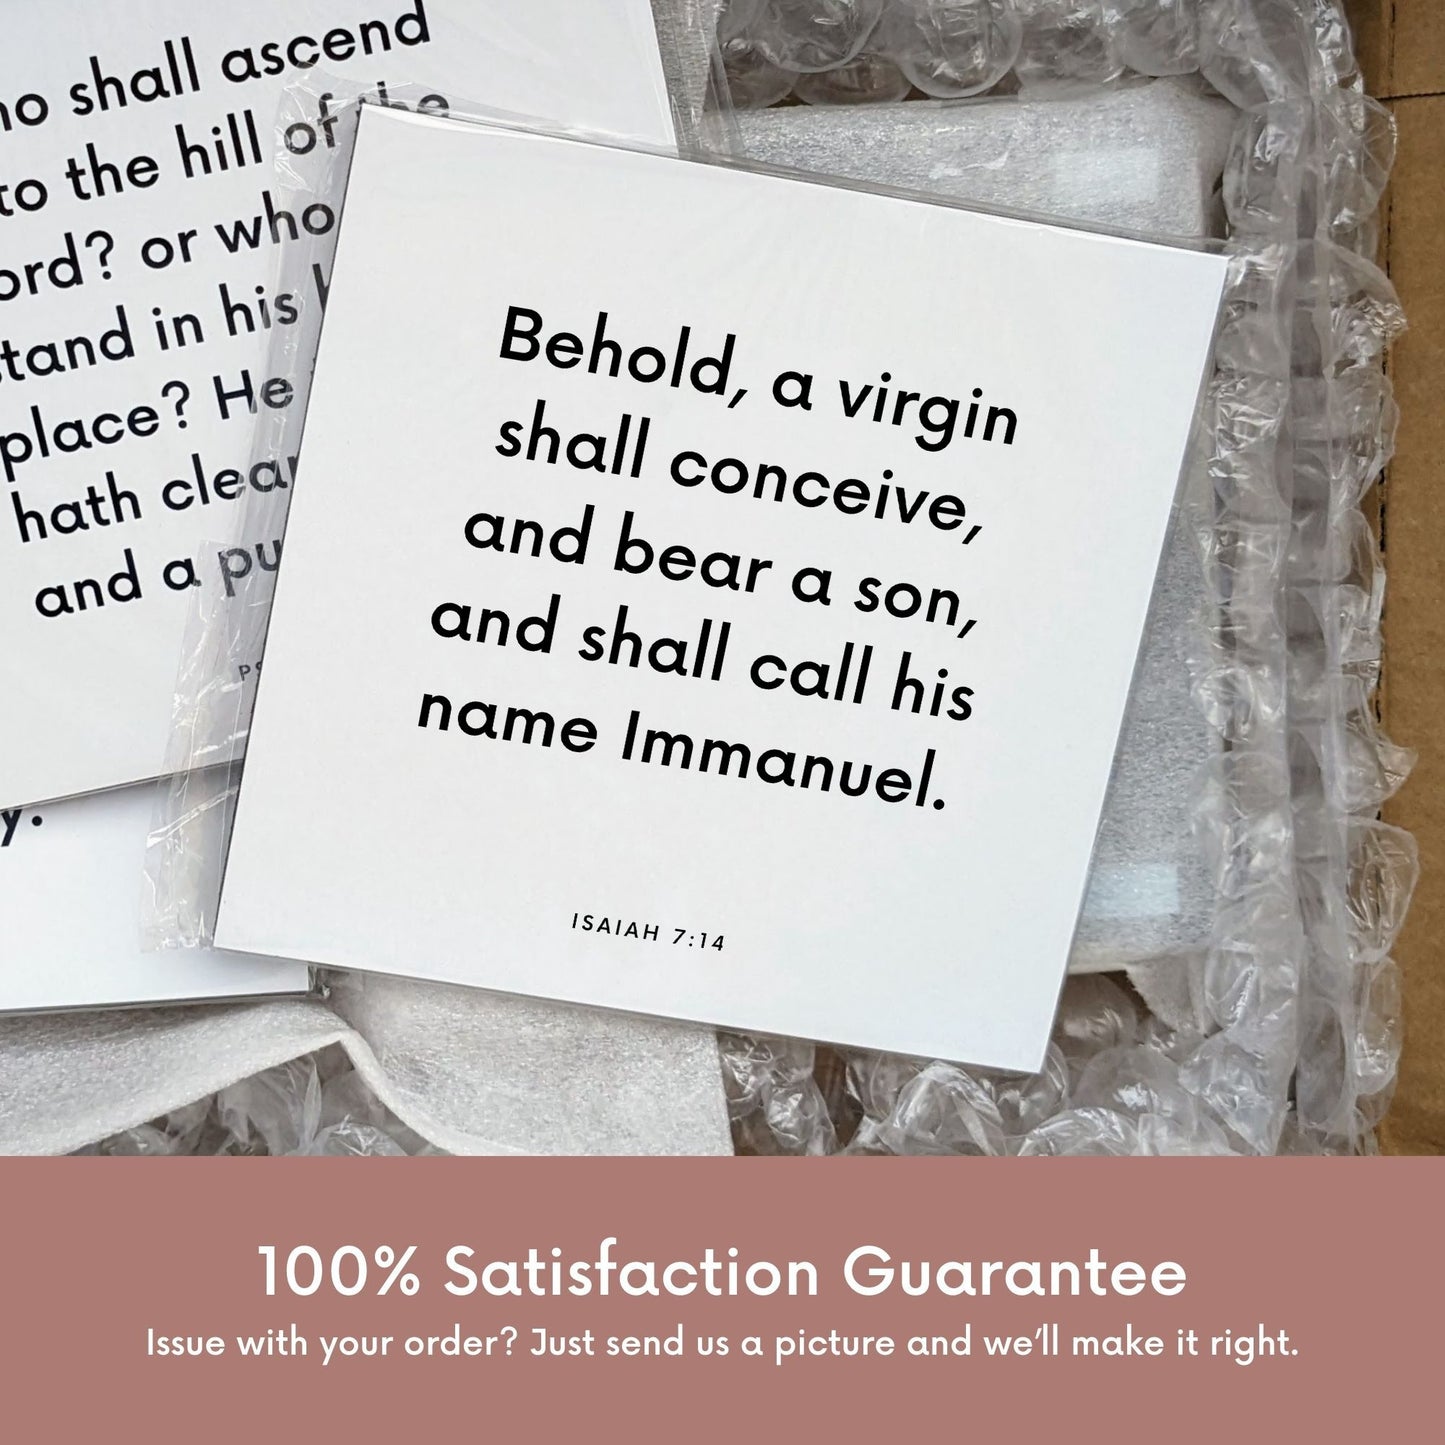 Shipping materials for scripture tile of Isaiah 7:14 - "Behold, a virgin shall conceive, and bear a son"